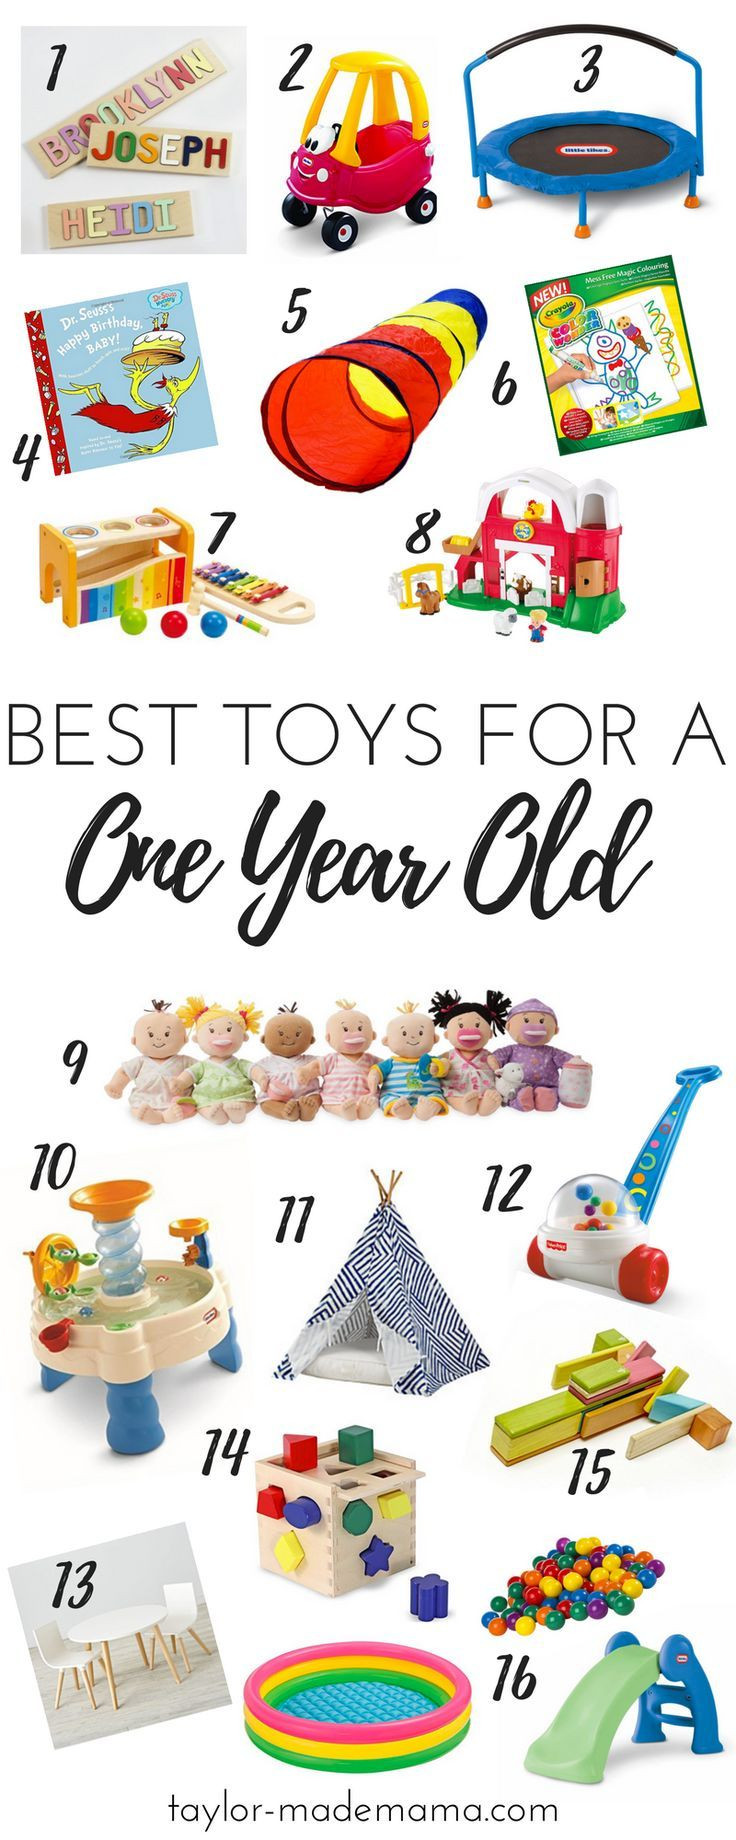 1St Birthday Boy Gift Ideas
 The Ultimate First Birthday Party Planning And Gift Guide